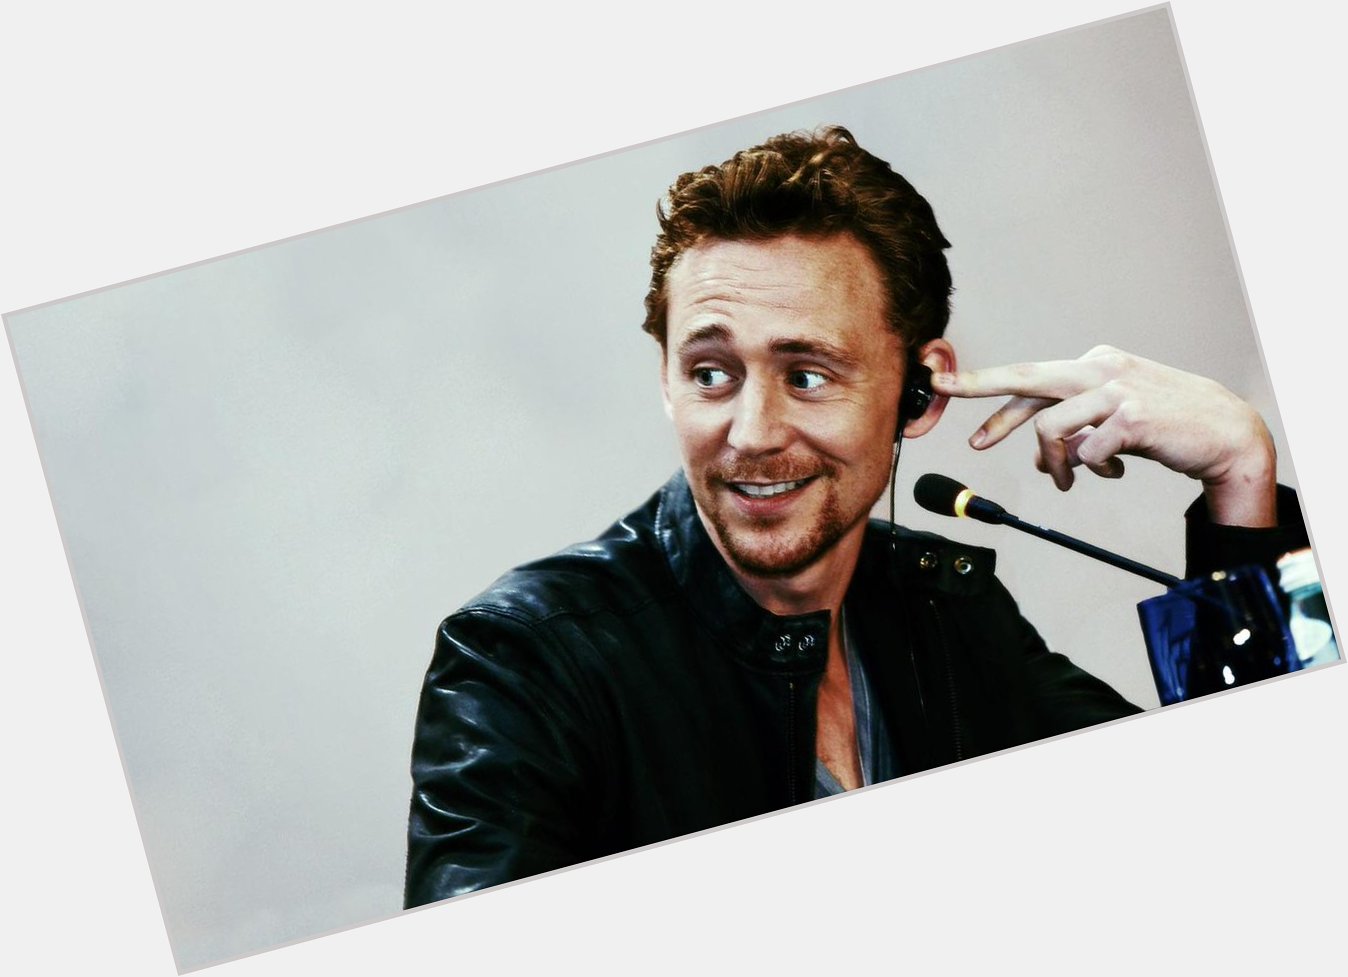 Today is Tom Hiddleston\s birthday so ask your local fangirl about the celebration! Happy birthday 